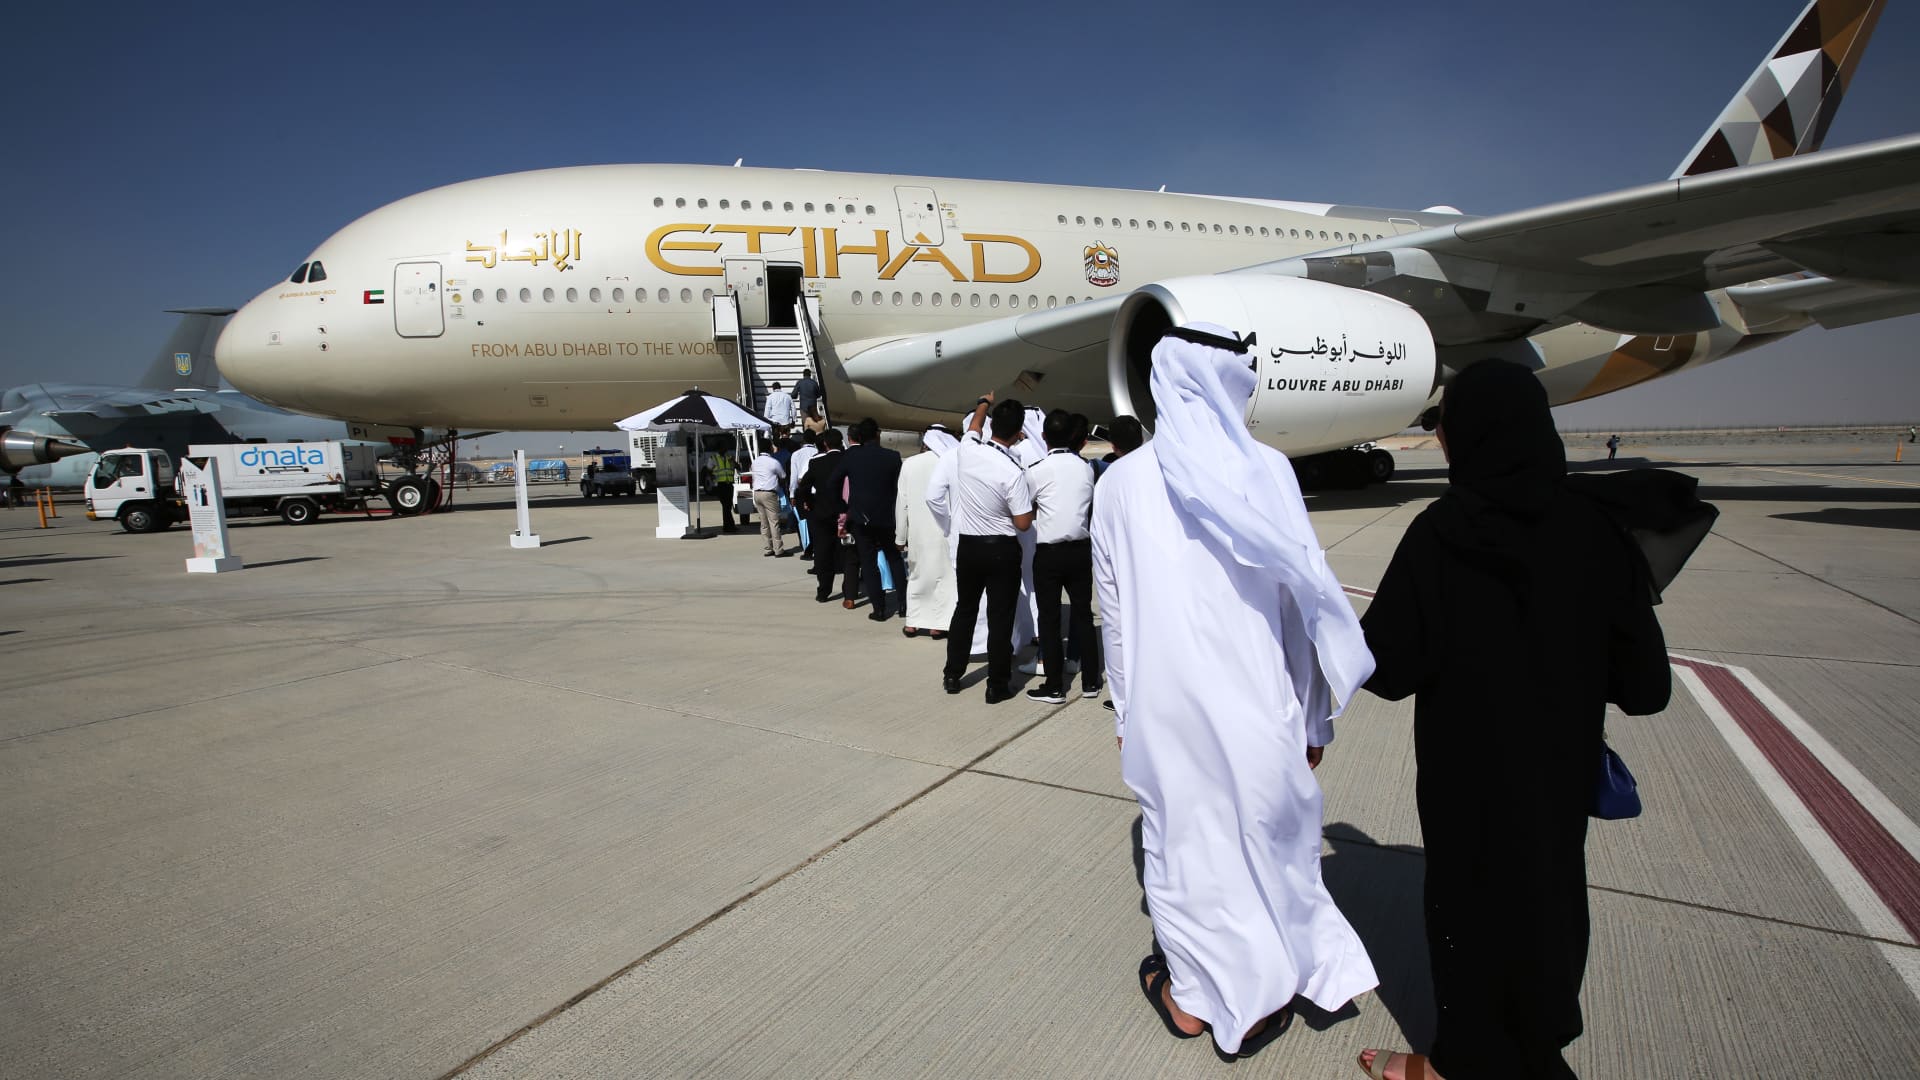 An Airbus A380-800 jet airliner operated by Etihad Airways, on display at the Dubai Airshow 2017 international aerospace event. 